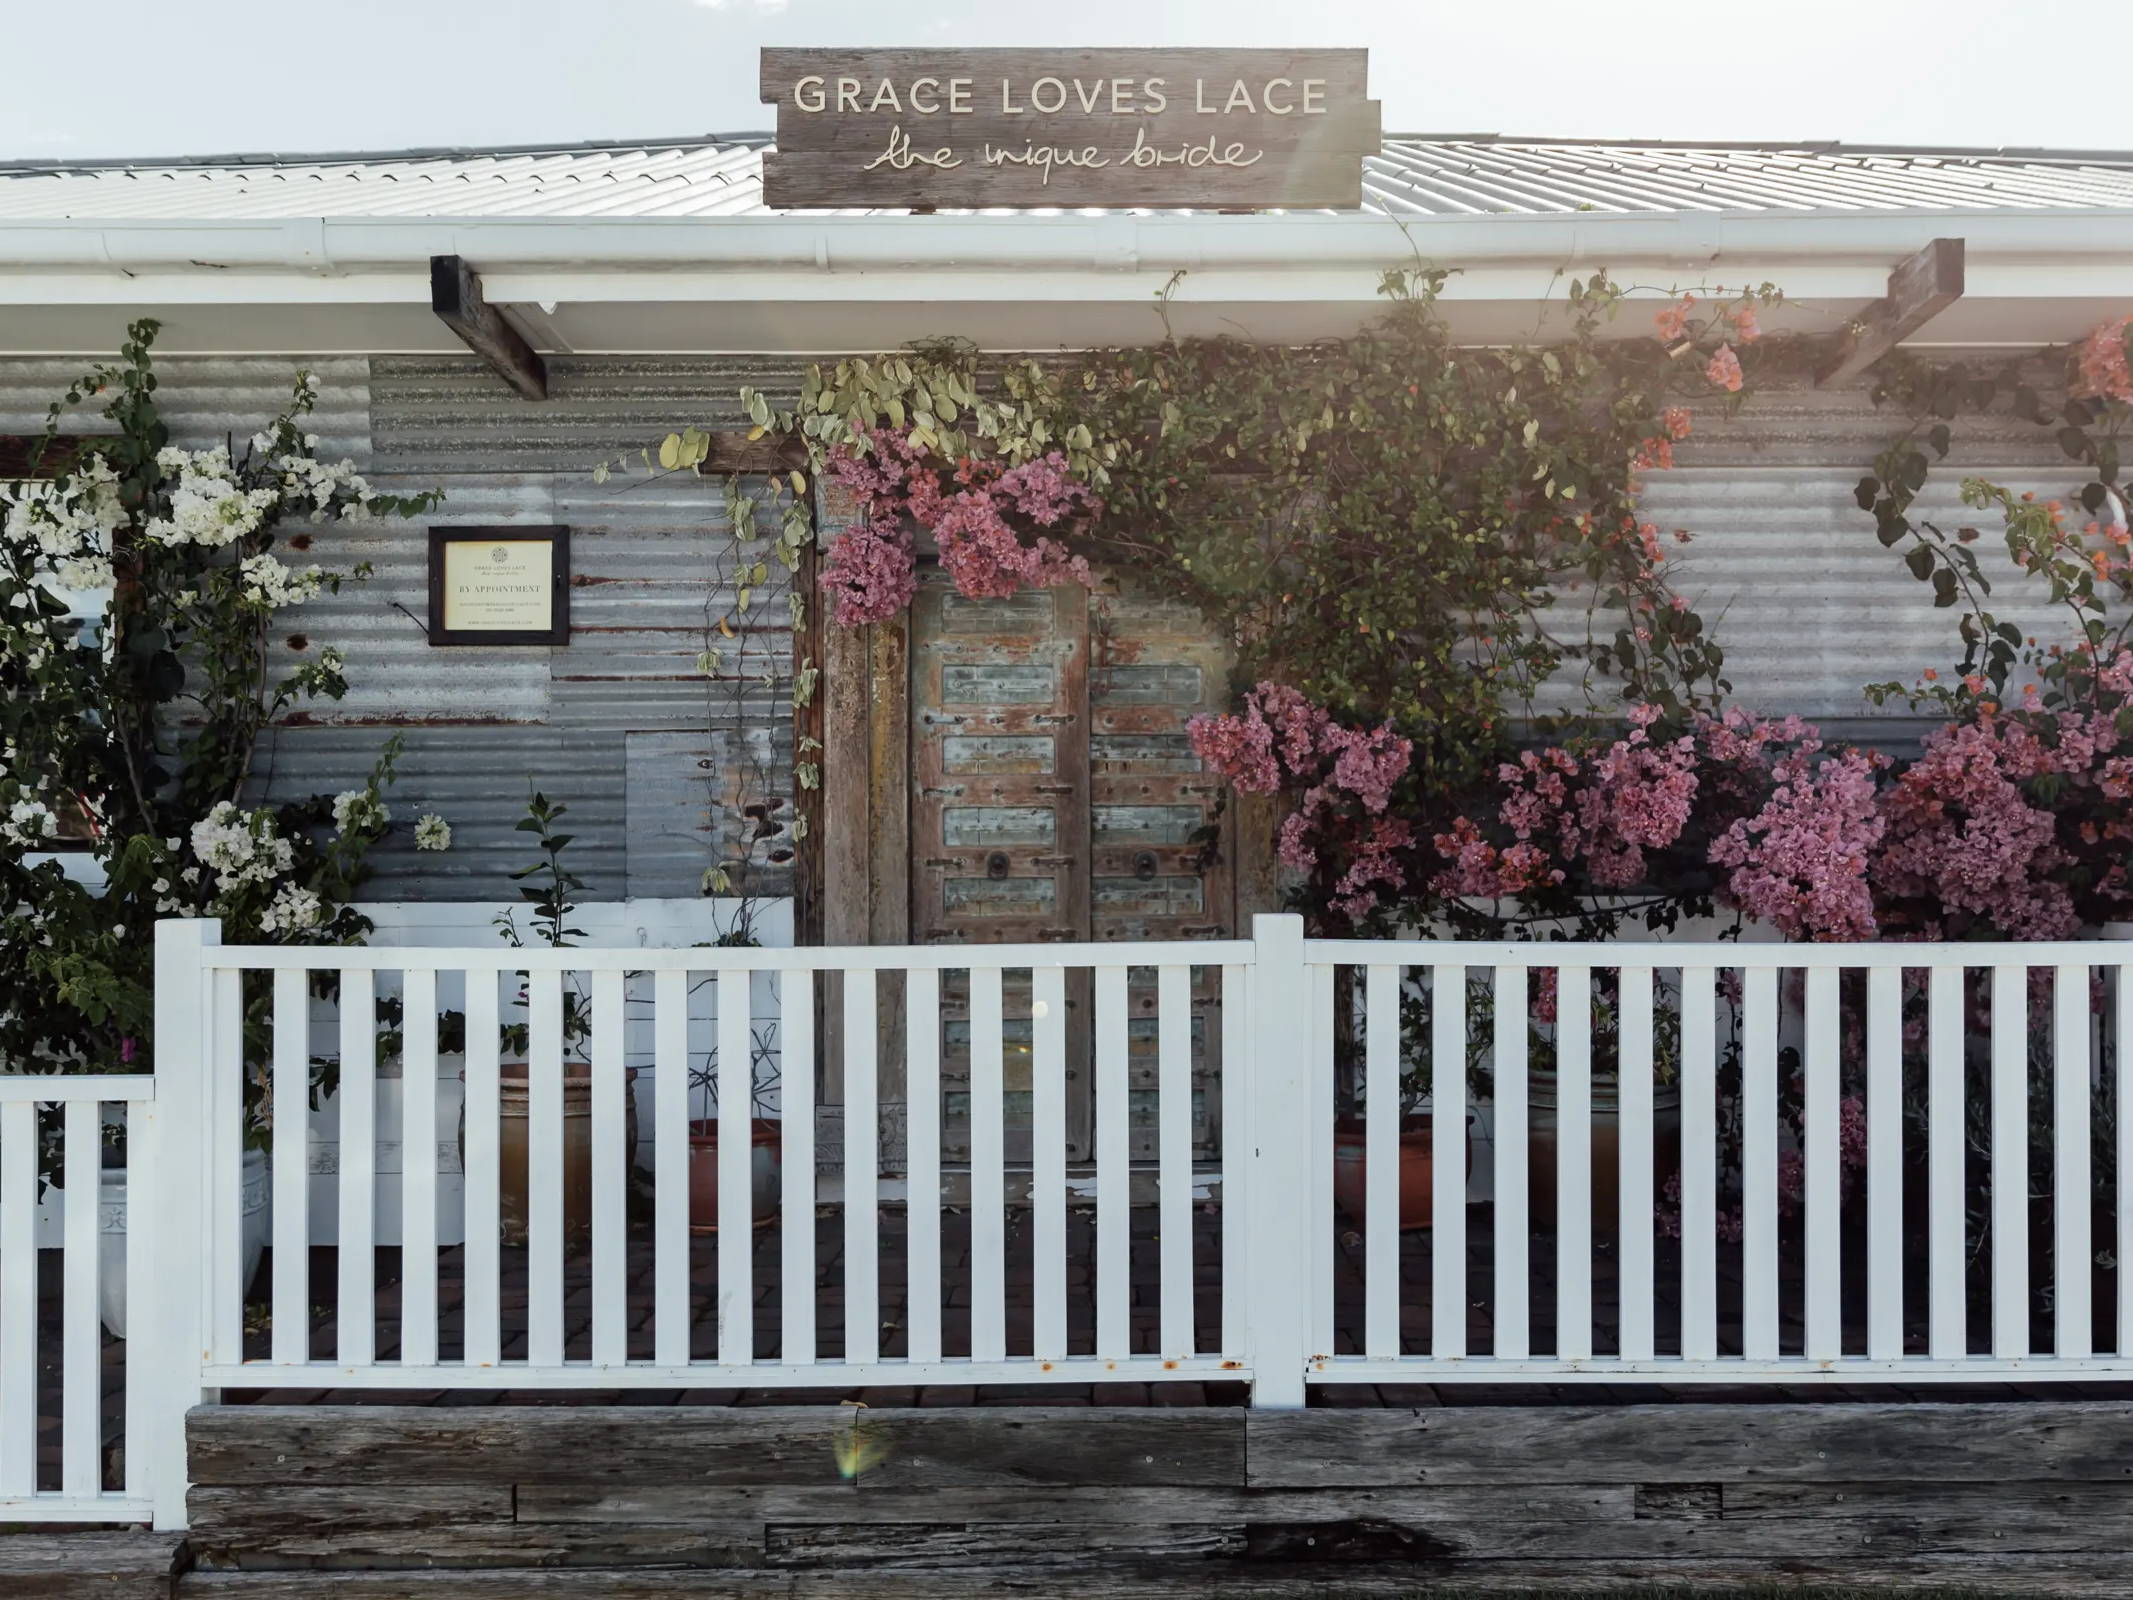 The exterior of the Gold Coast Grace Loves Lace showroom with white fence and pink bougainvillea